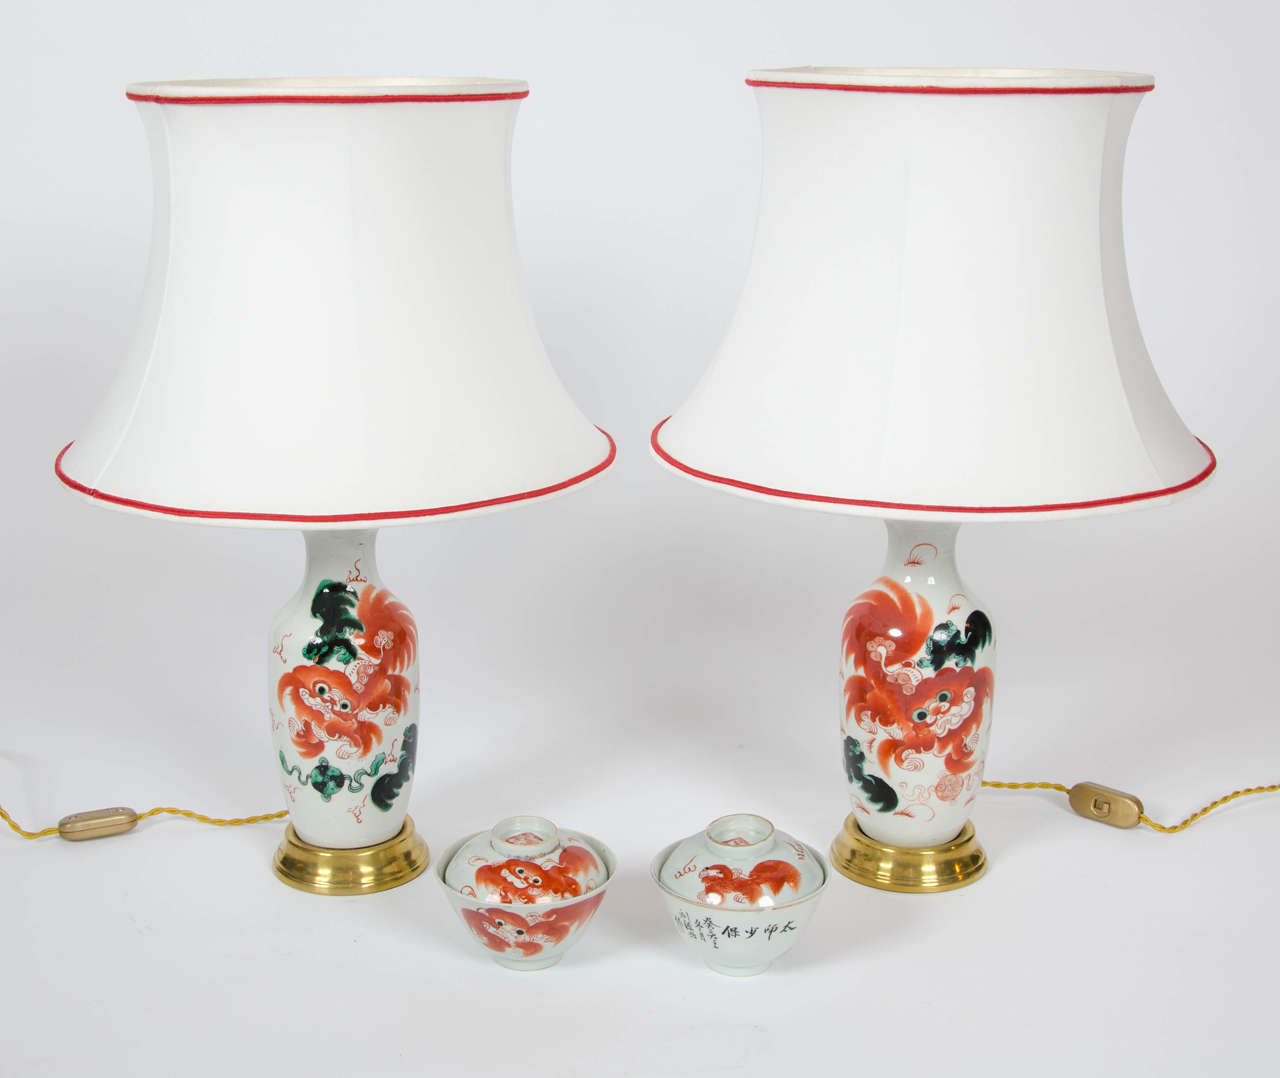 Pair of late 19th century Chinese Porcelain Vases as Table Lamps For Sale 5